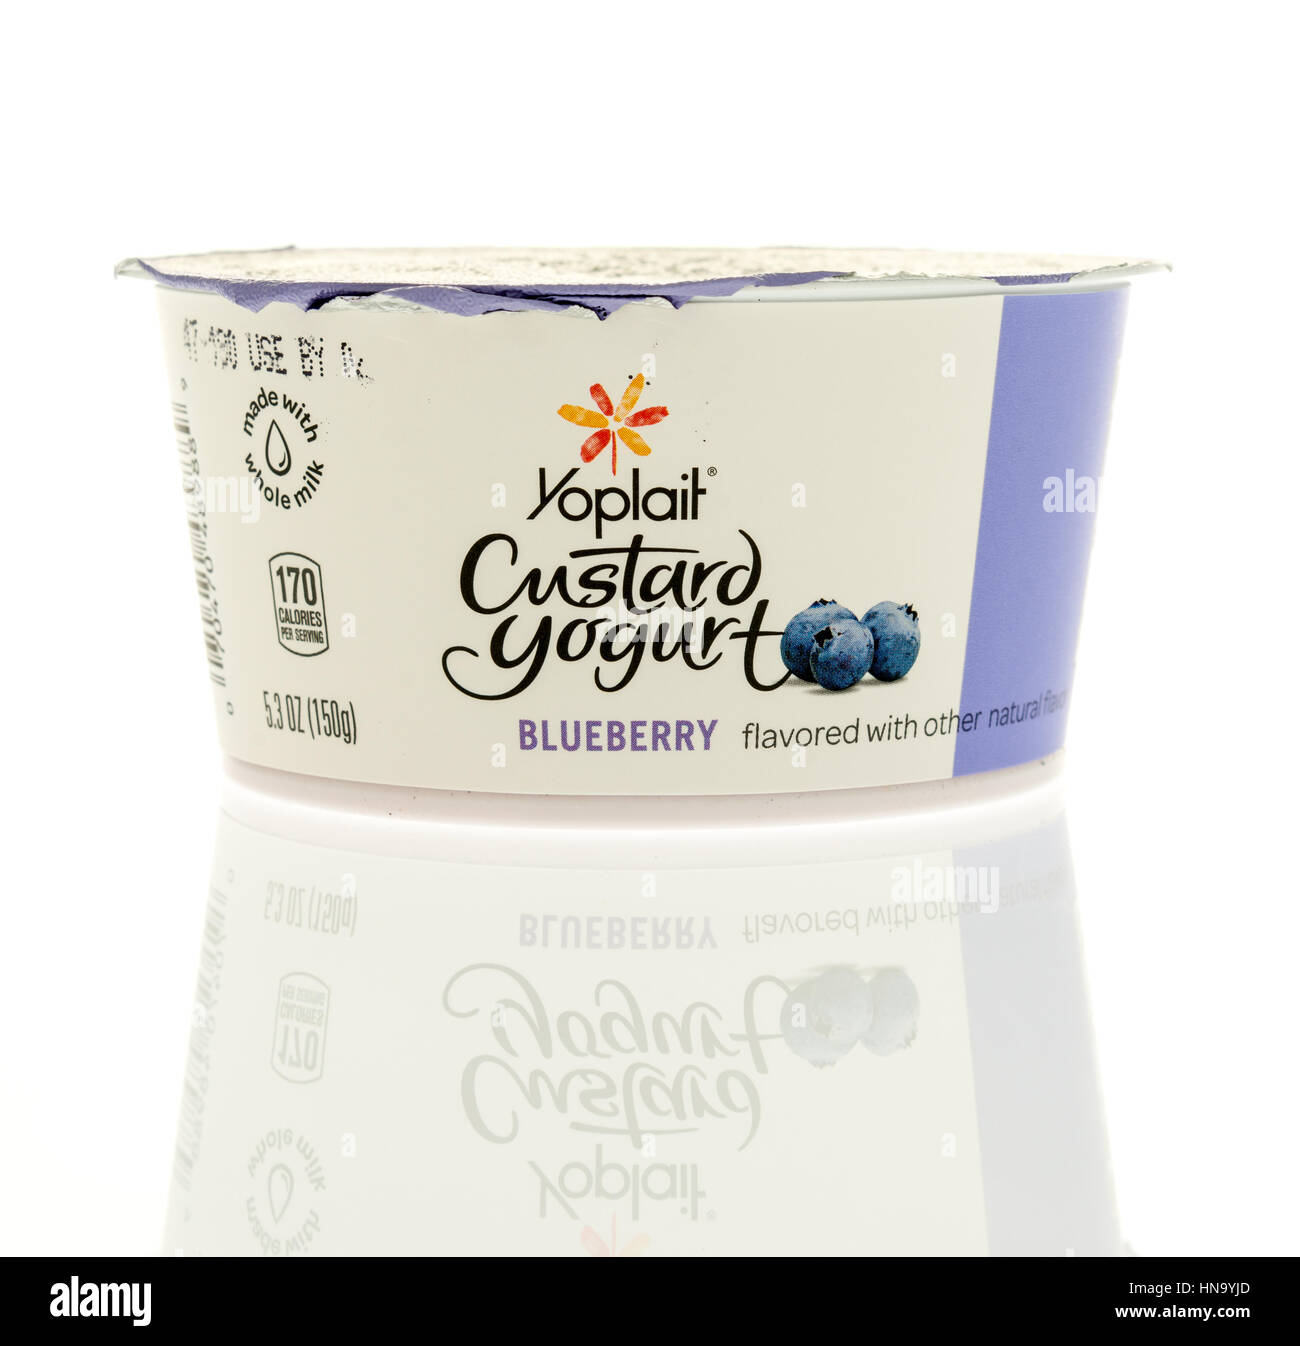 Winneconne, WI -9 February 2017: Container of Yoplait custard yogurt in blueberry flavor on an isolated background. Stock Photo